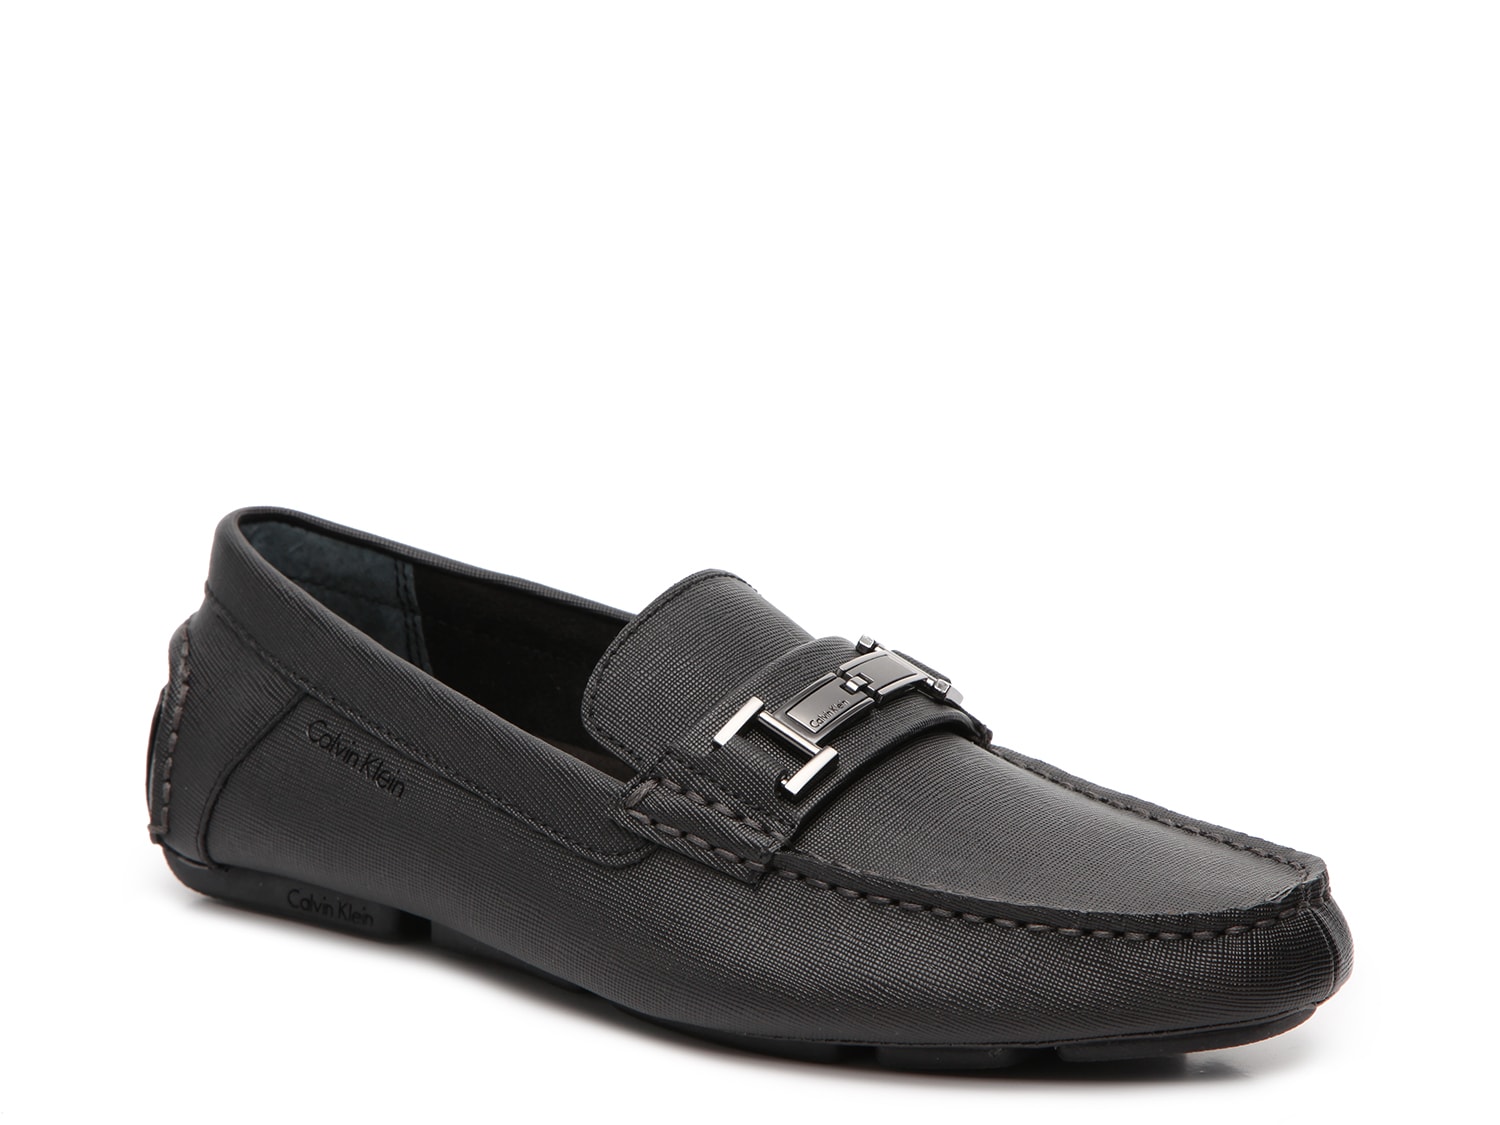 Men's Loafers, Slip-Ons, and Moccasins 